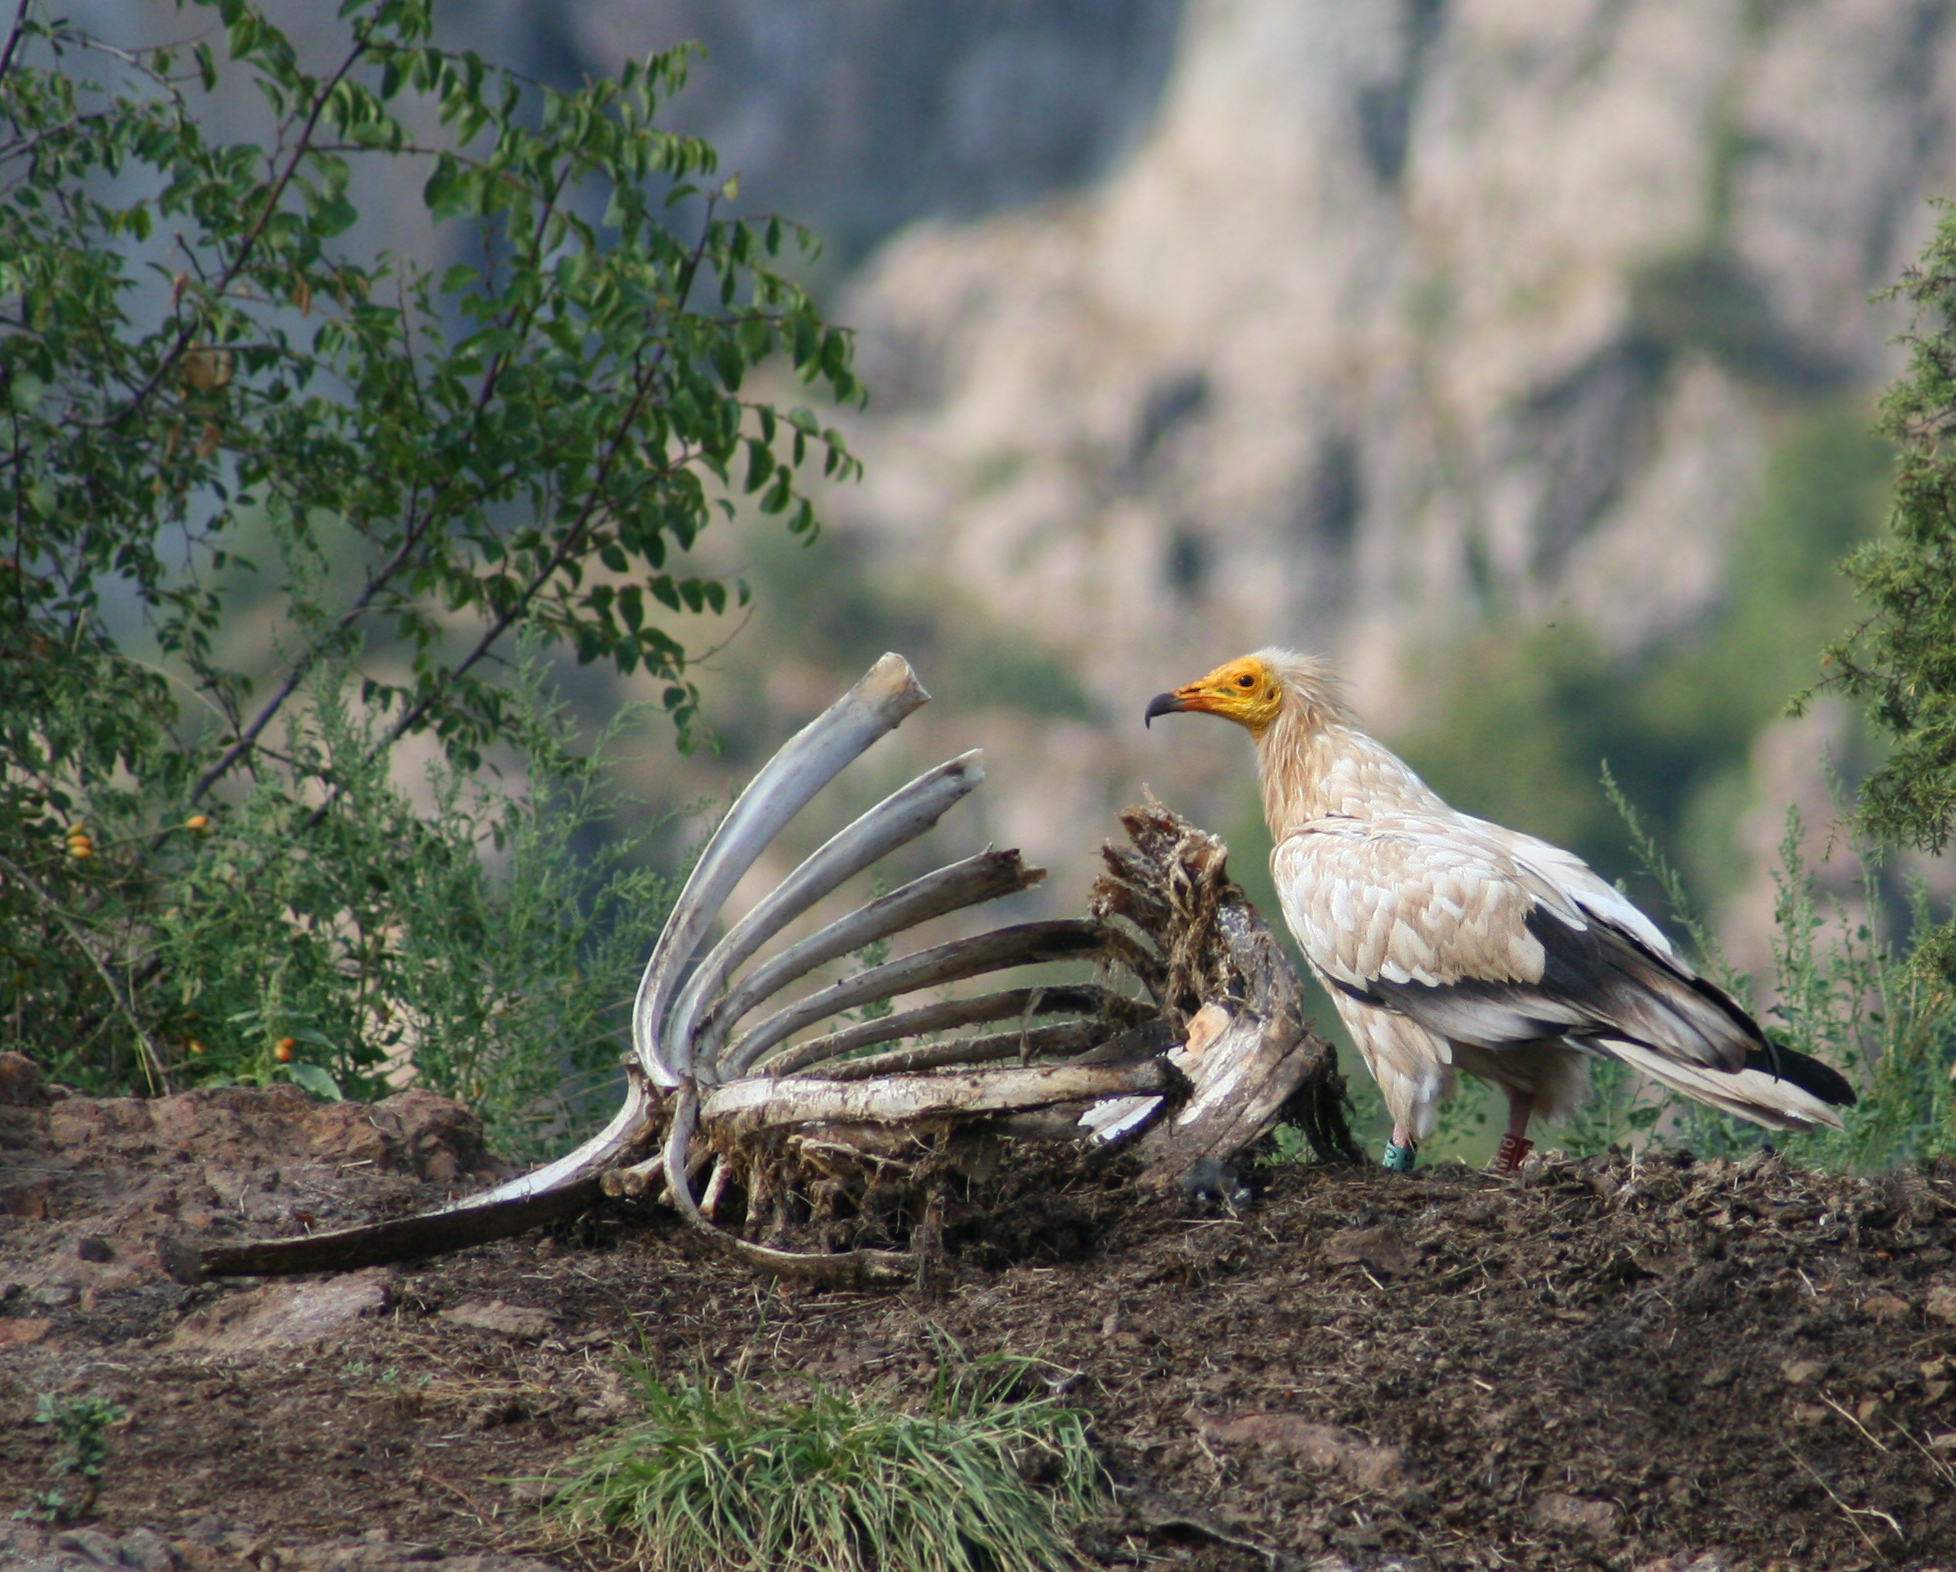 The Latest Surprise from the Egyptian Vulture